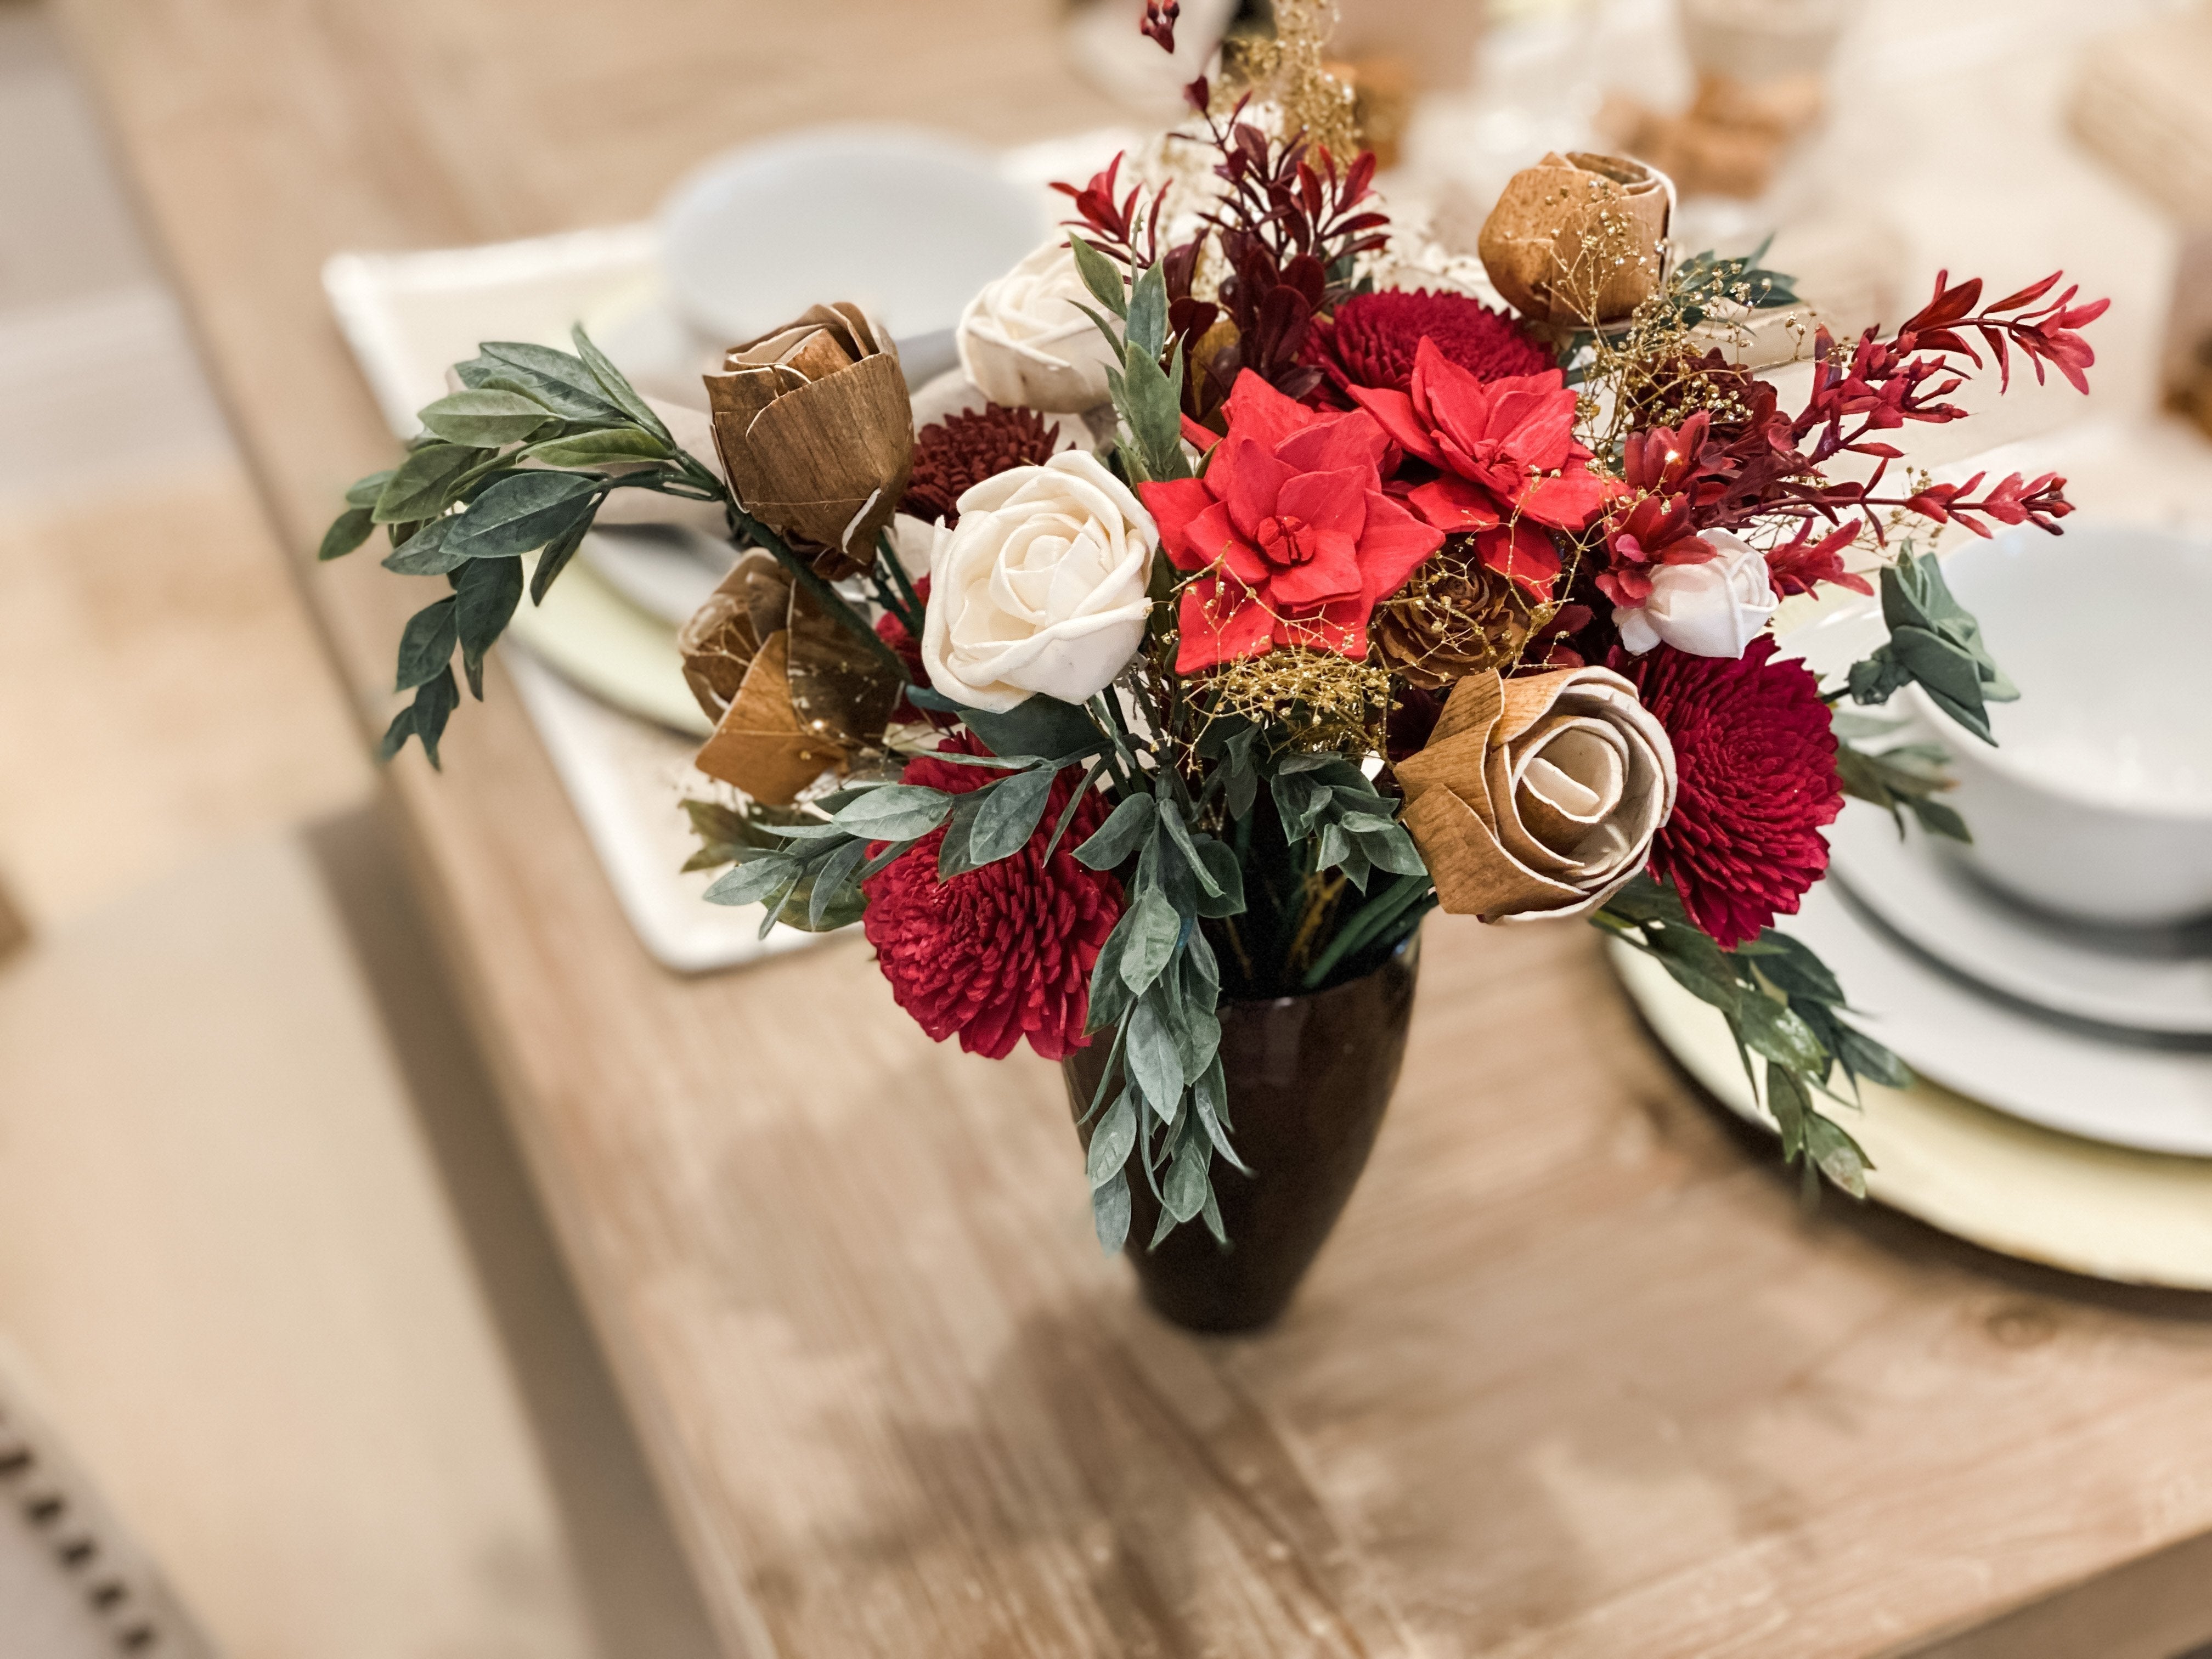 How to Make the Perfect Holiday Flower Arrangement, Without